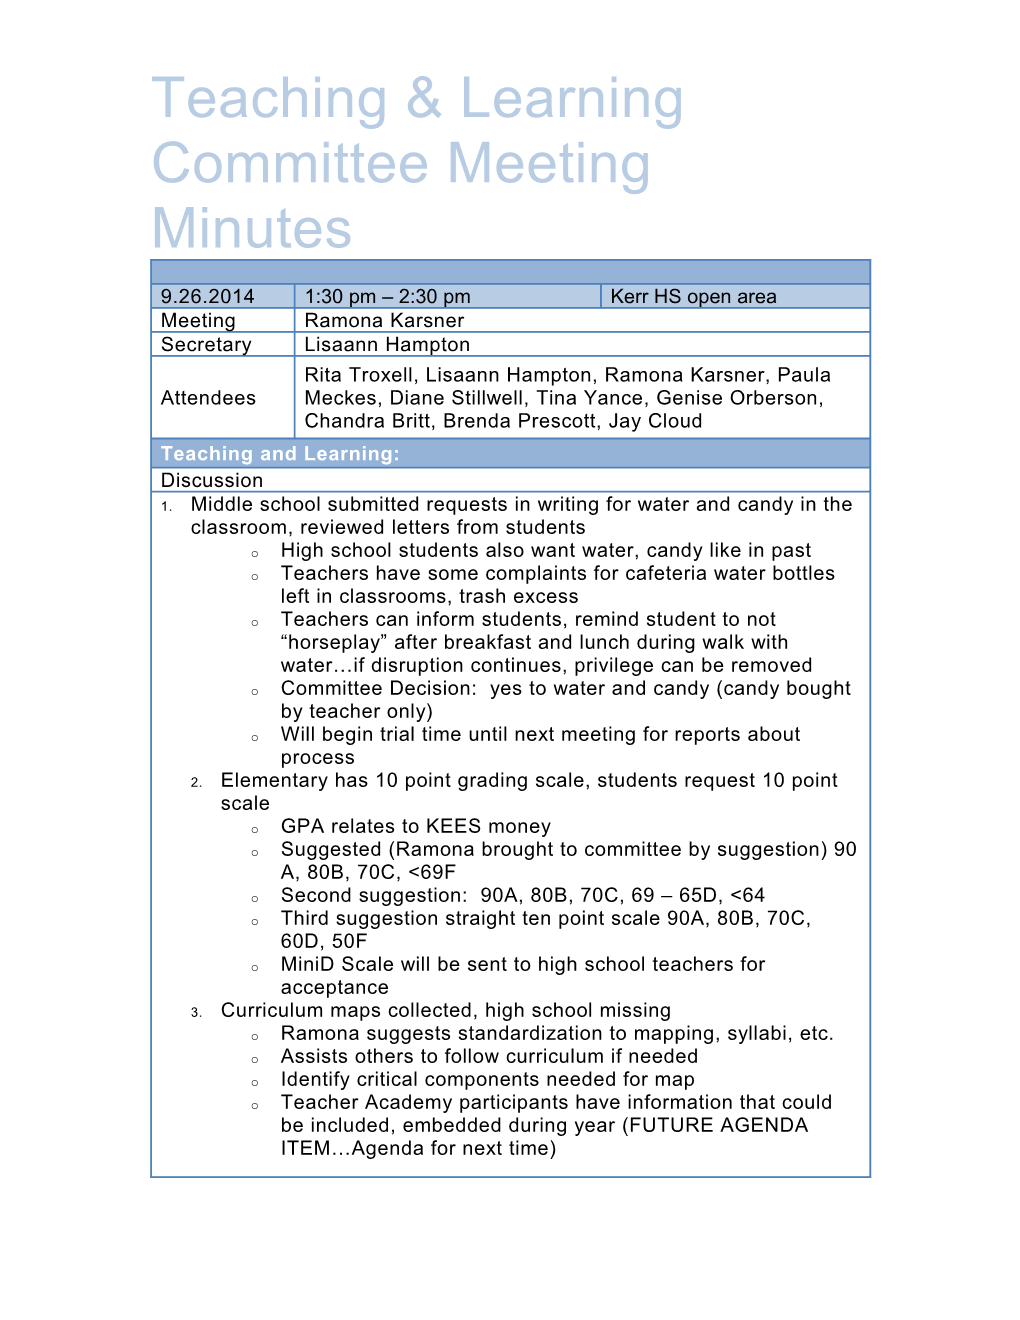 Teaching & Learningcommittee Meeting Minutes